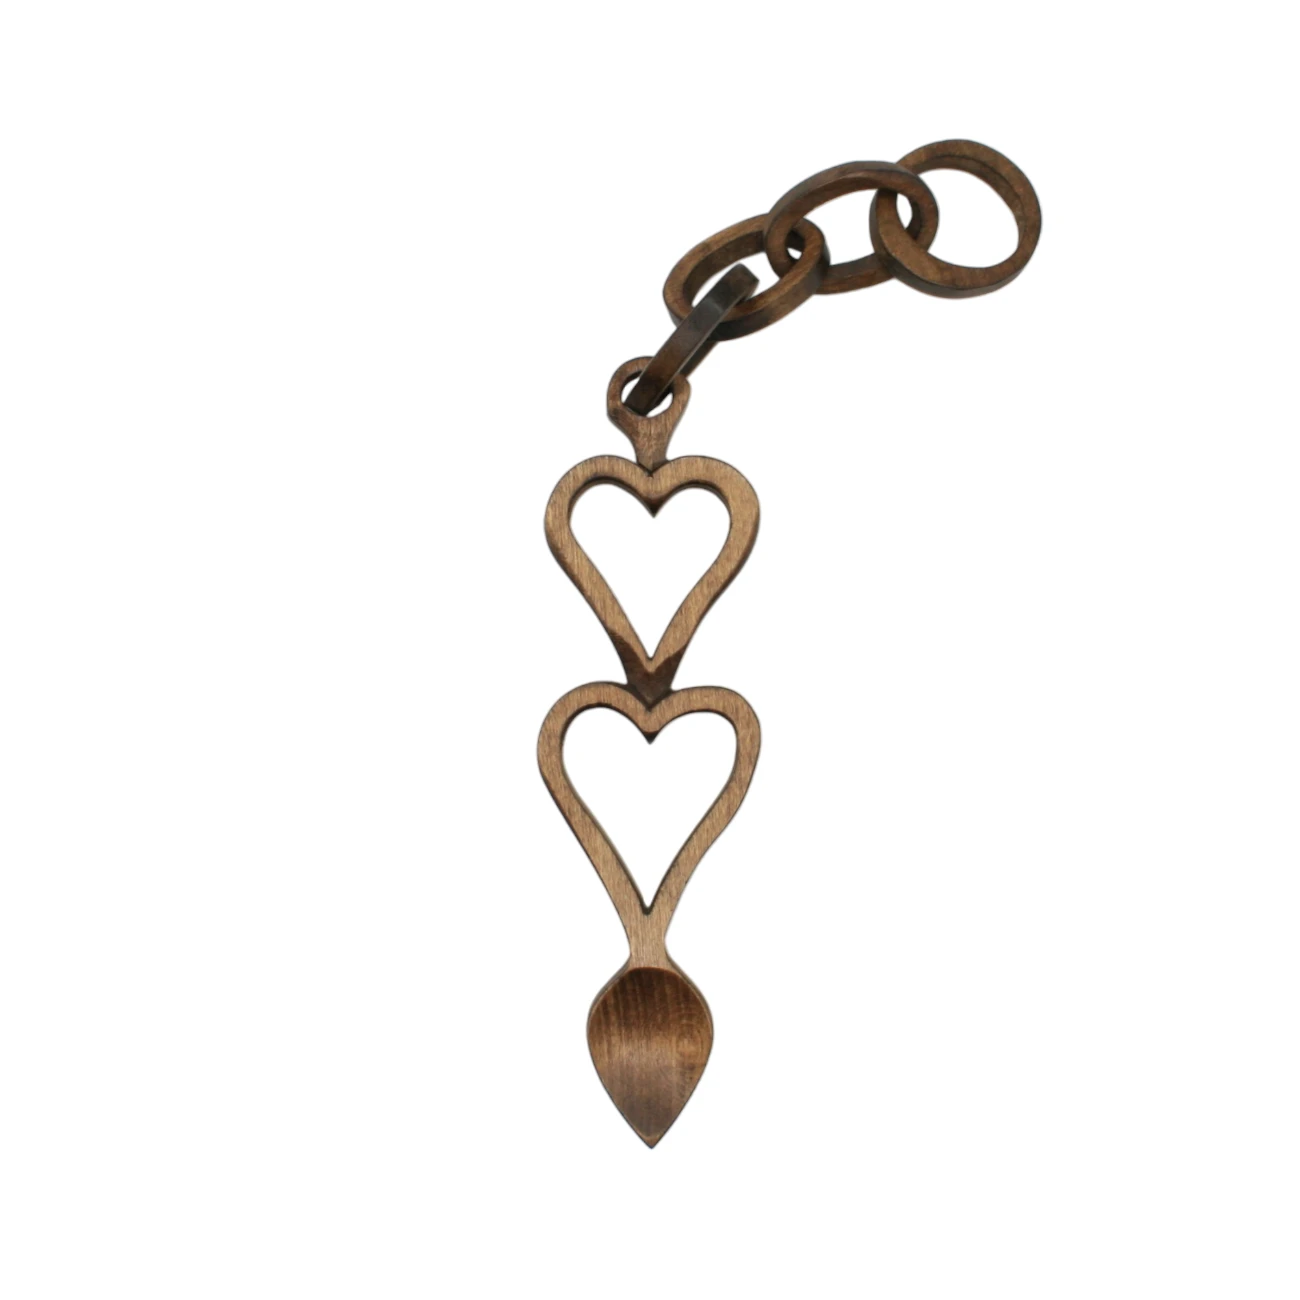 An image of a lovespoon titled Hearts with chain